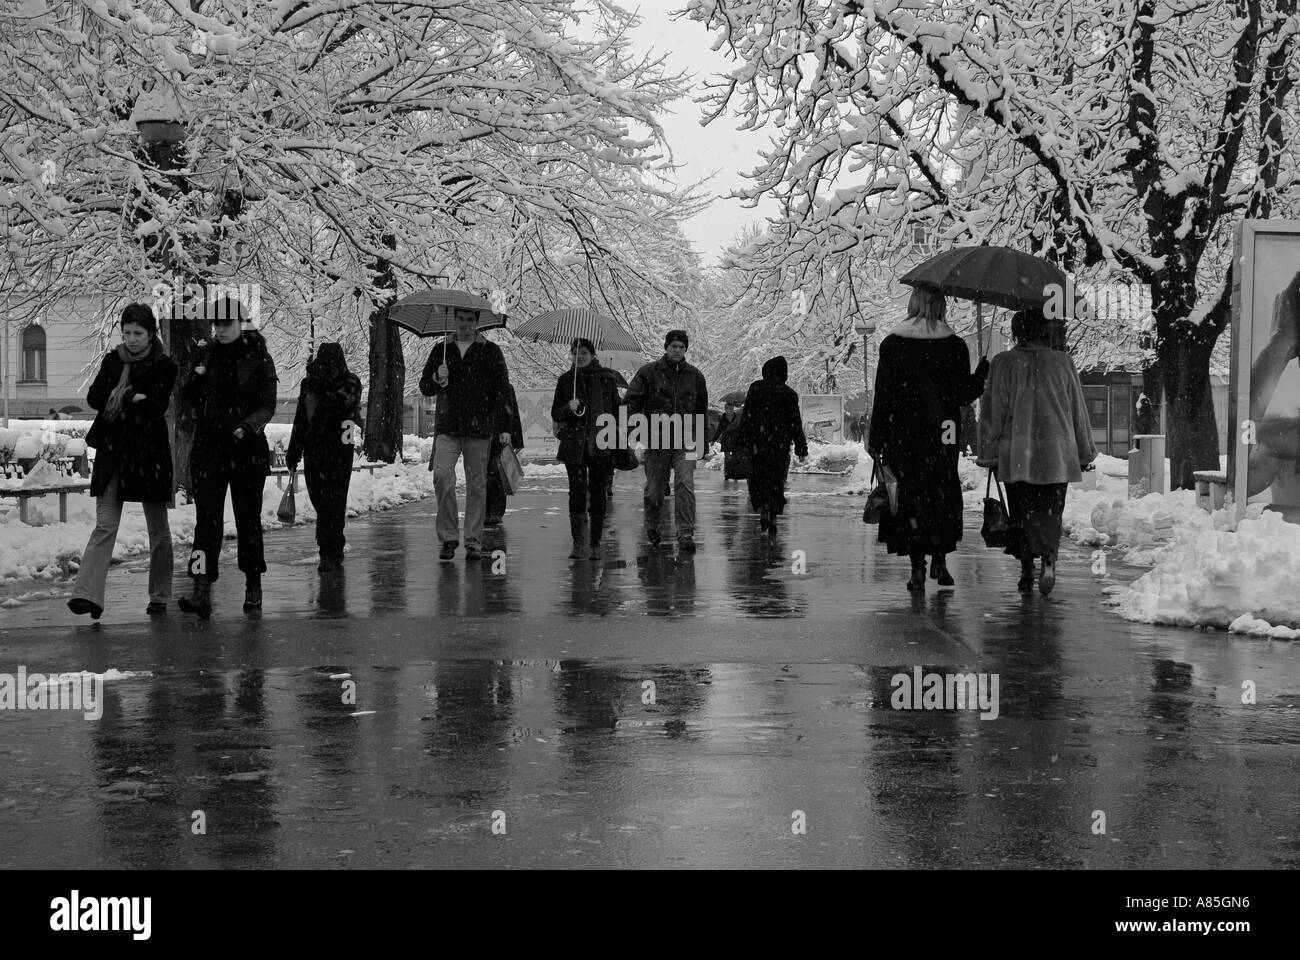 People Walking in a Busy European City Street During Winter Snow Stock Photo